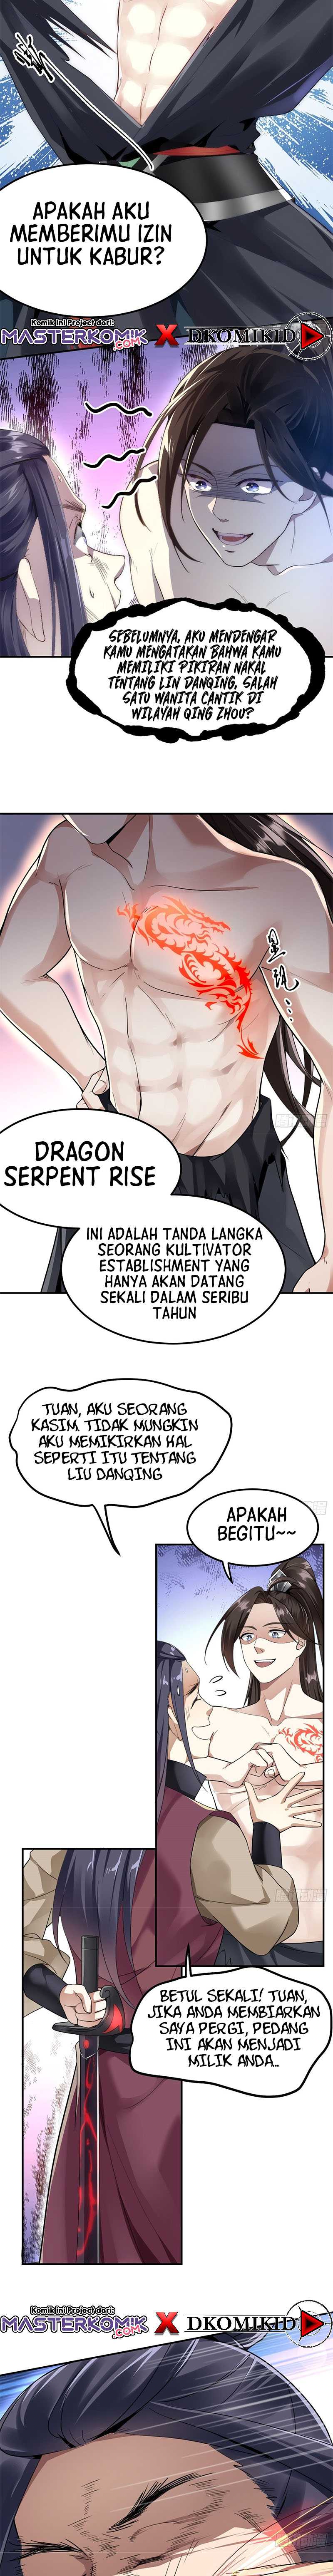 Cursed by Heaven, I’m Stronger Chapter 02 15